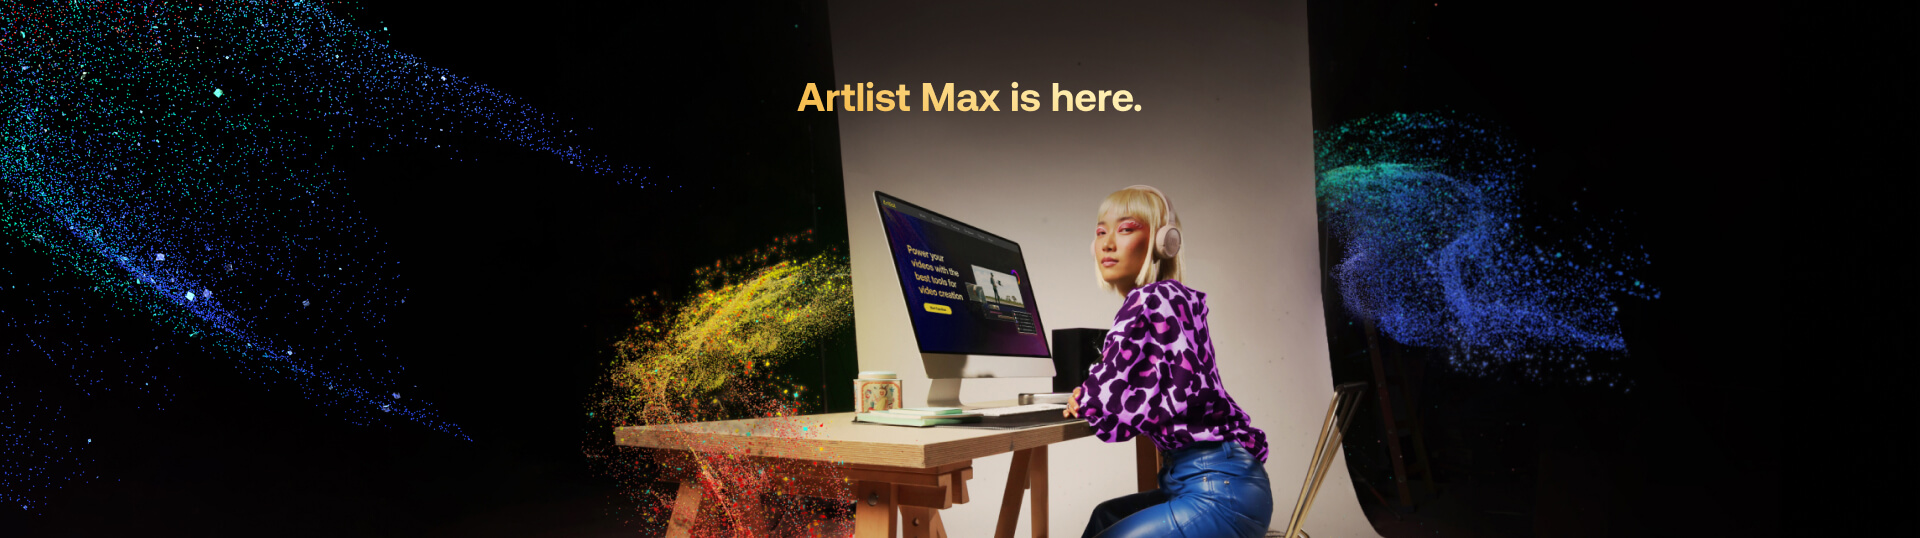 Launching Artlist Max - the Ultimate All-in-One Platform for Creators